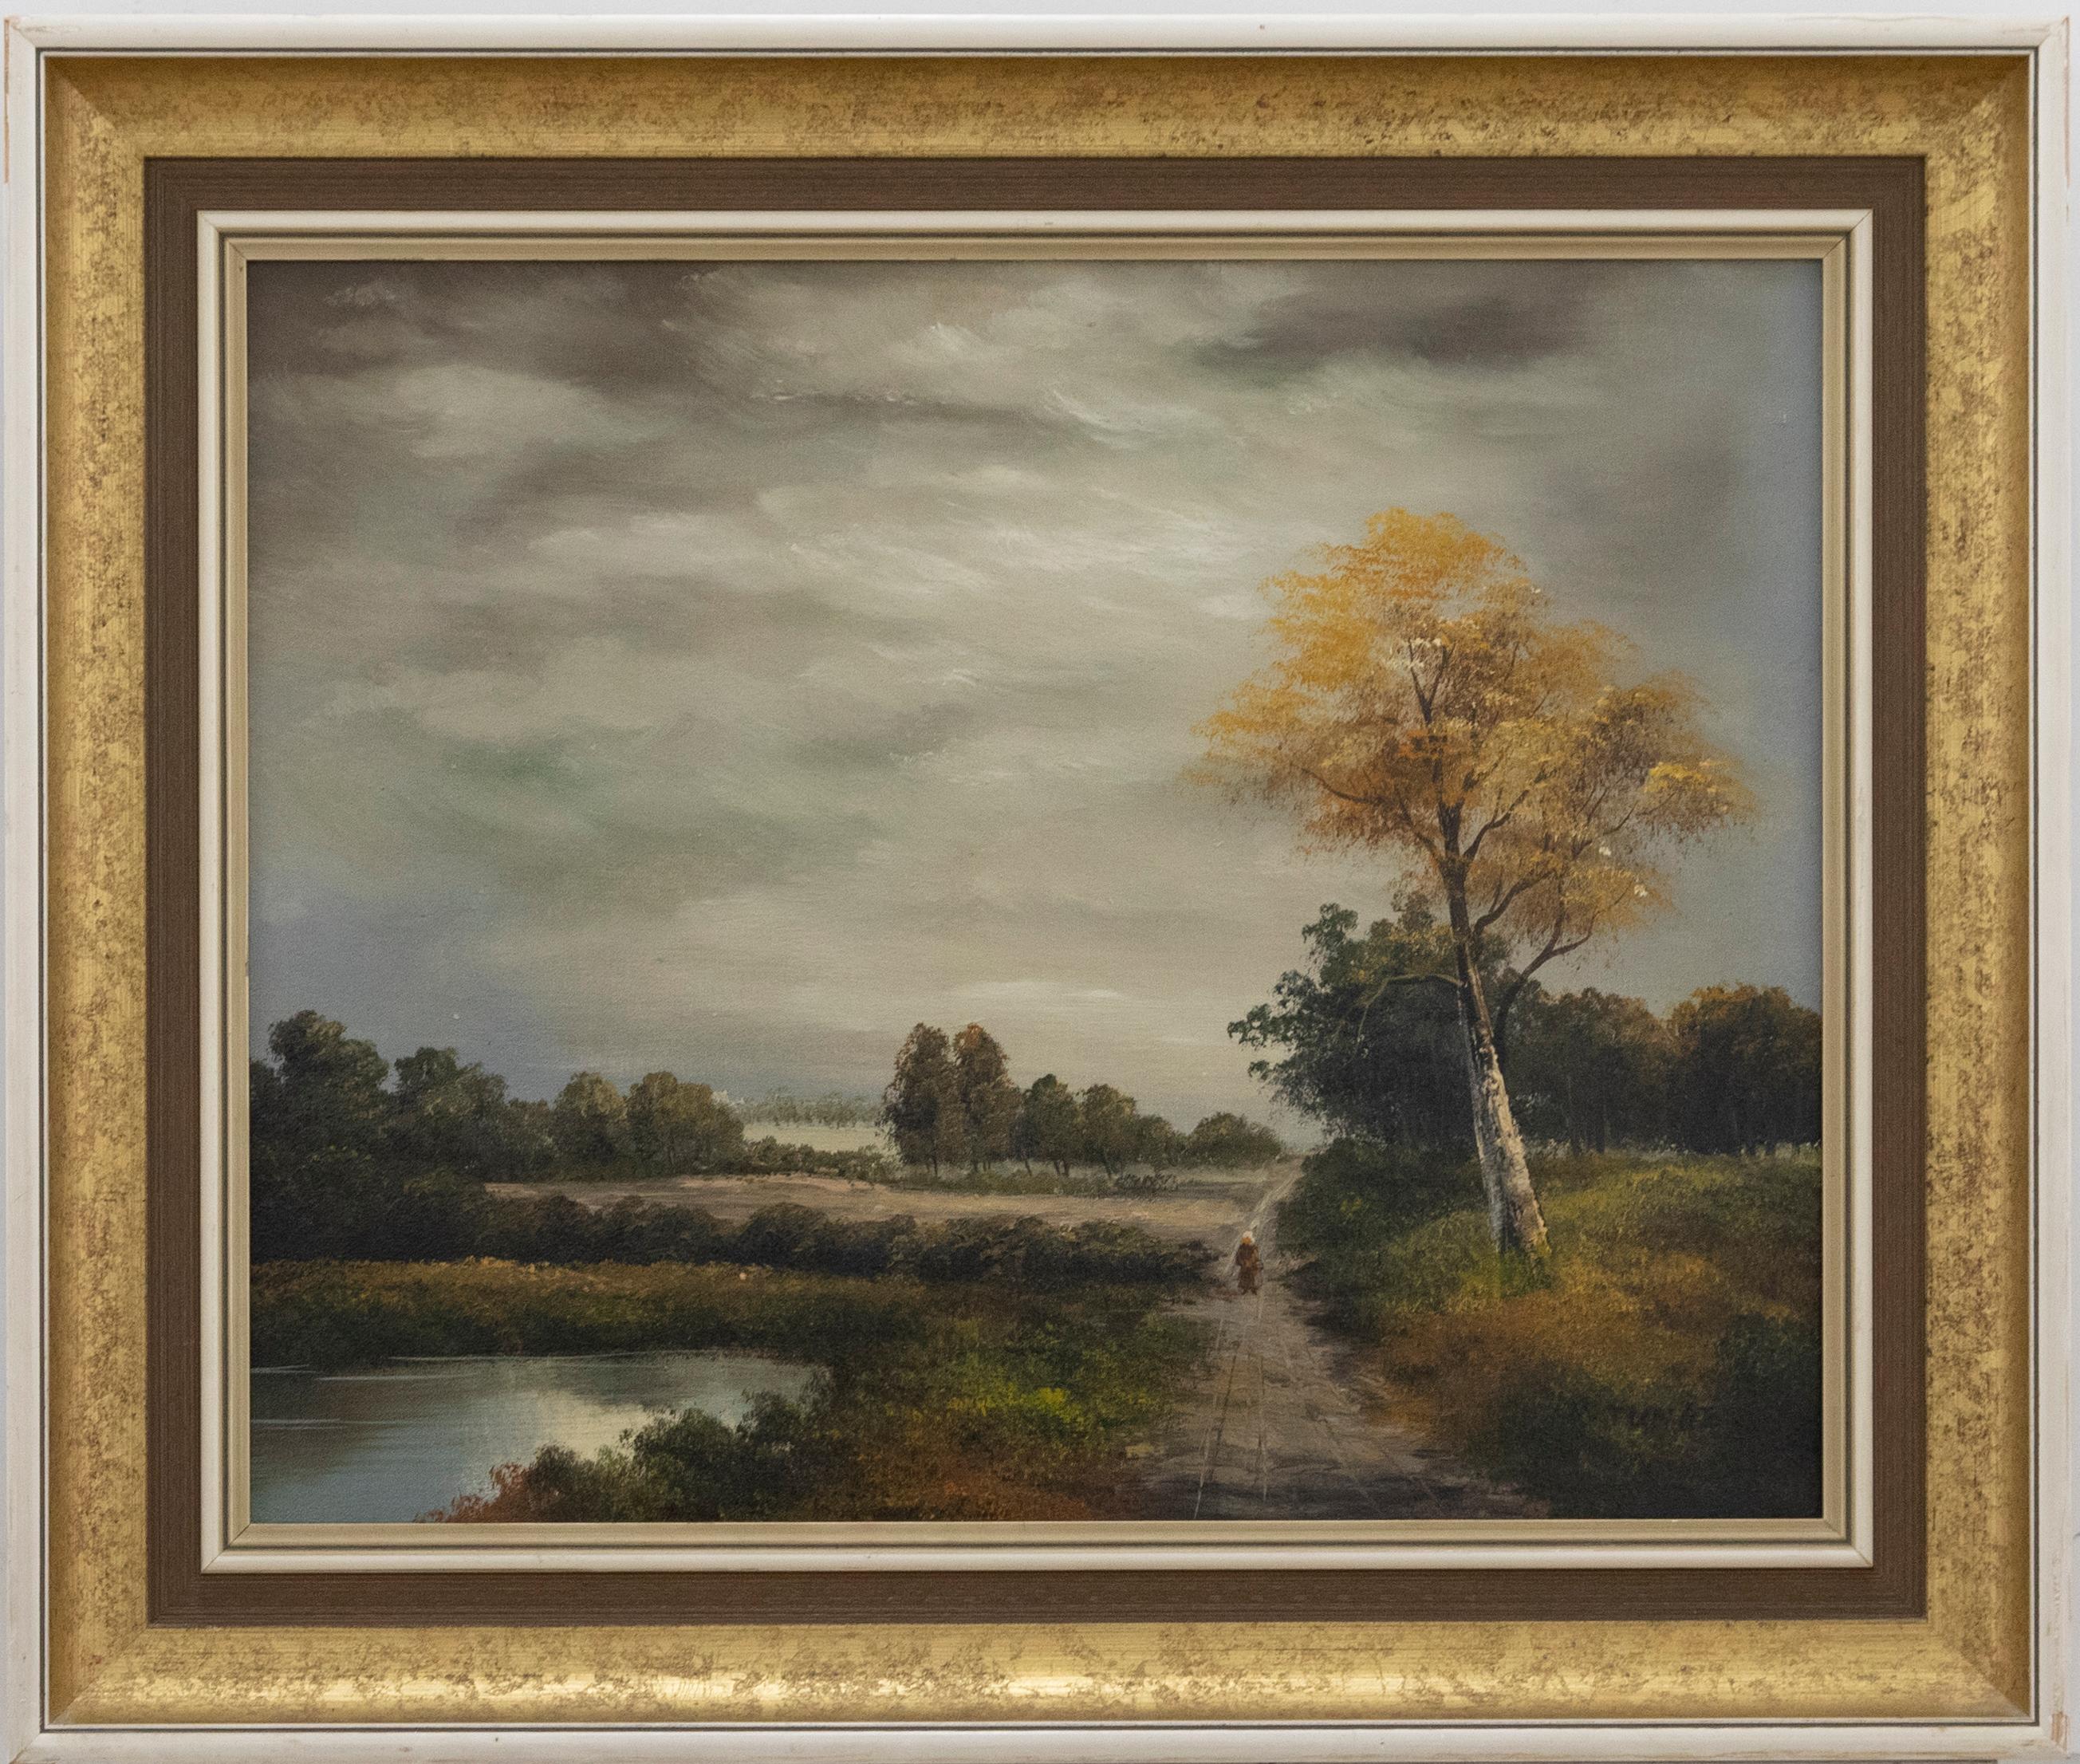 Unknown Landscape Painting - 20th Century Oil - On the Sunlit Path